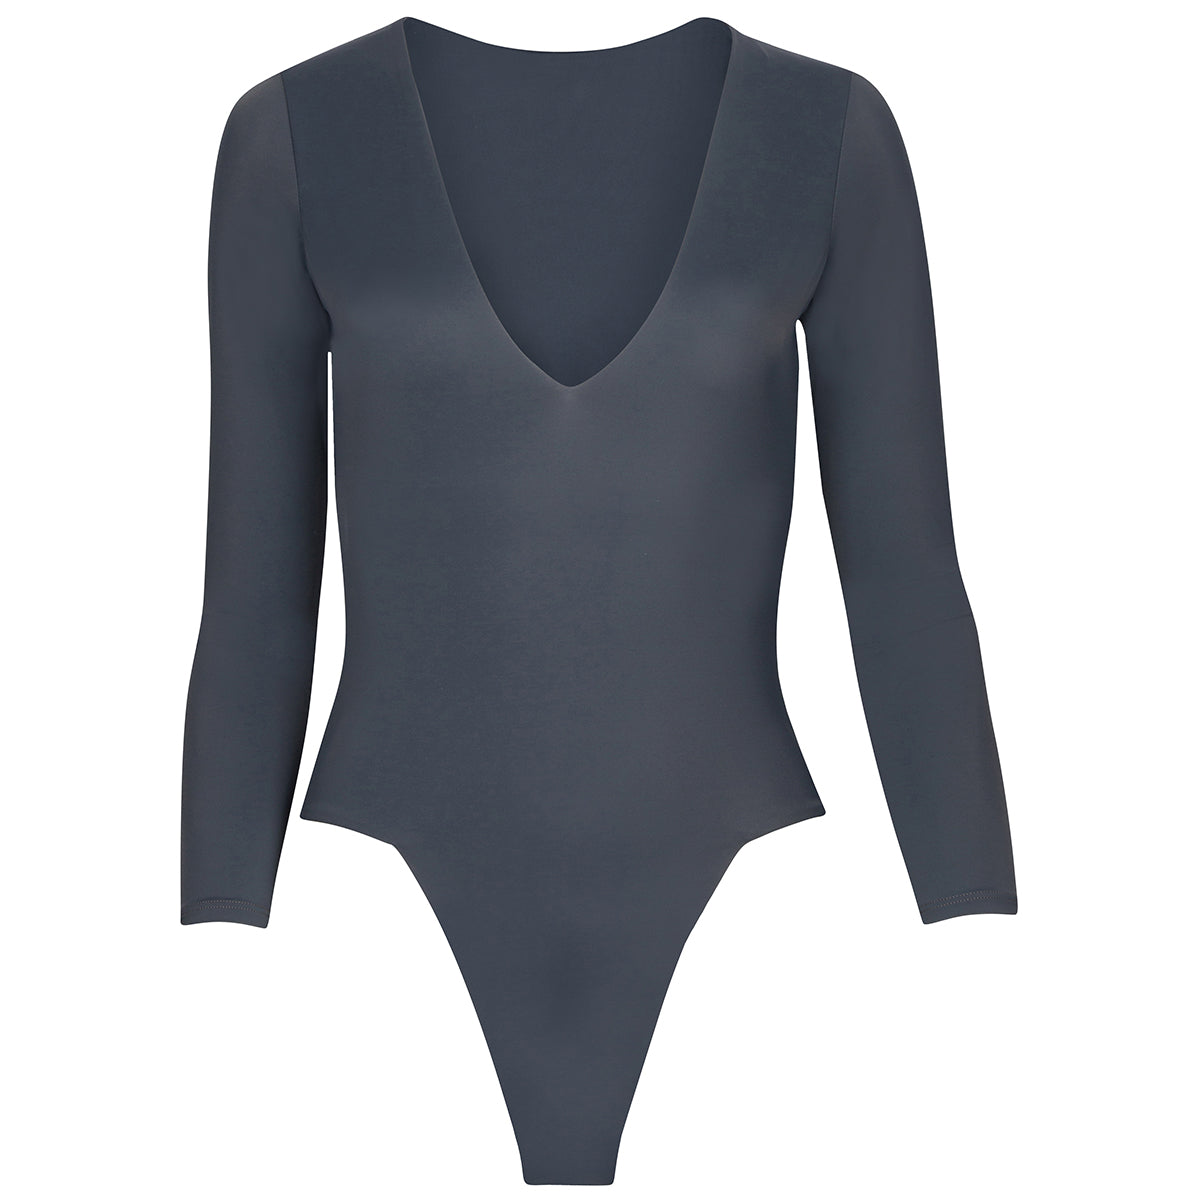 Genesis Square: The Modern Square Long Sleeve One Piece